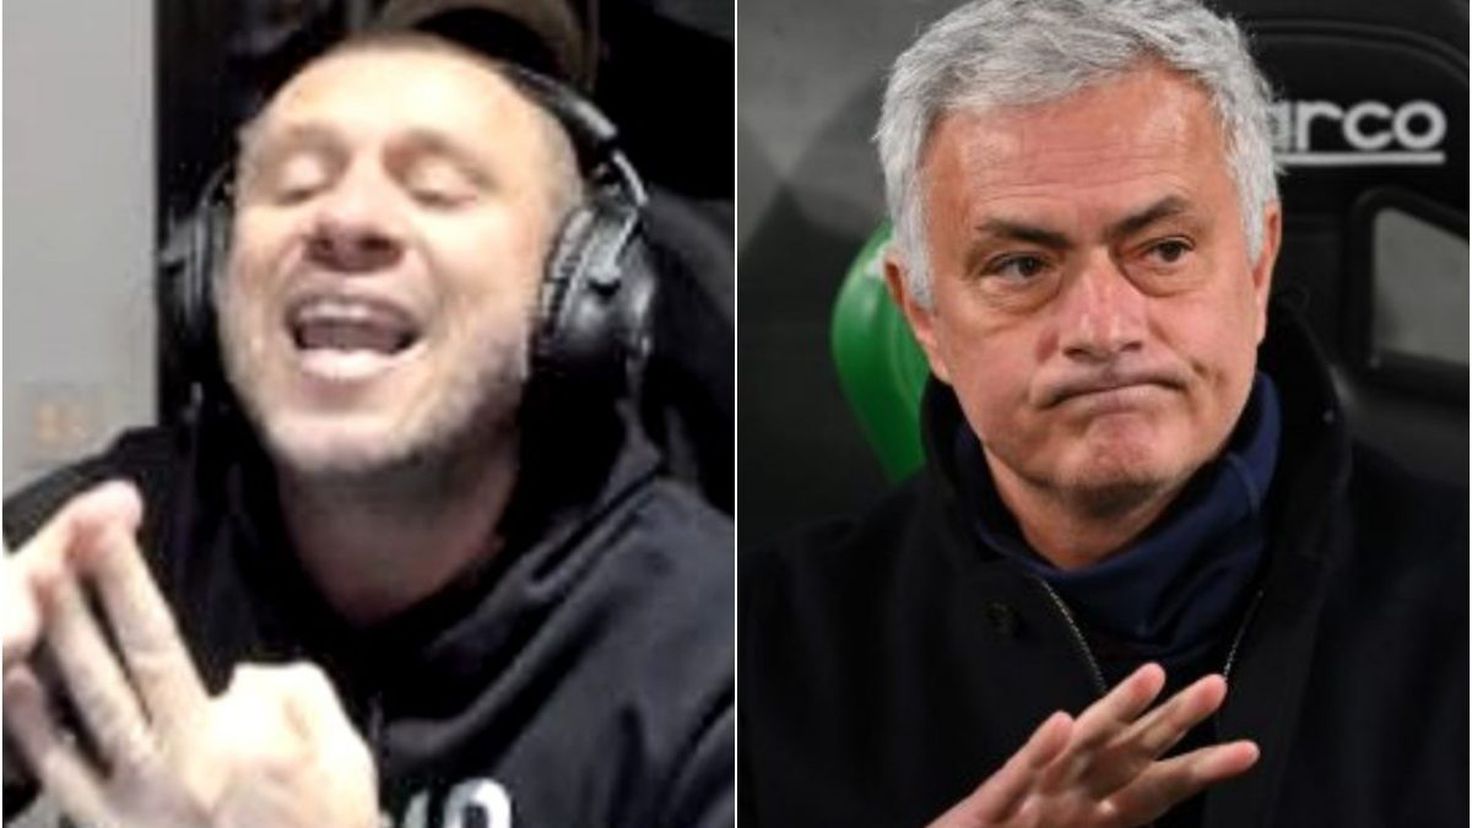 Cassano charges against Mou again: 